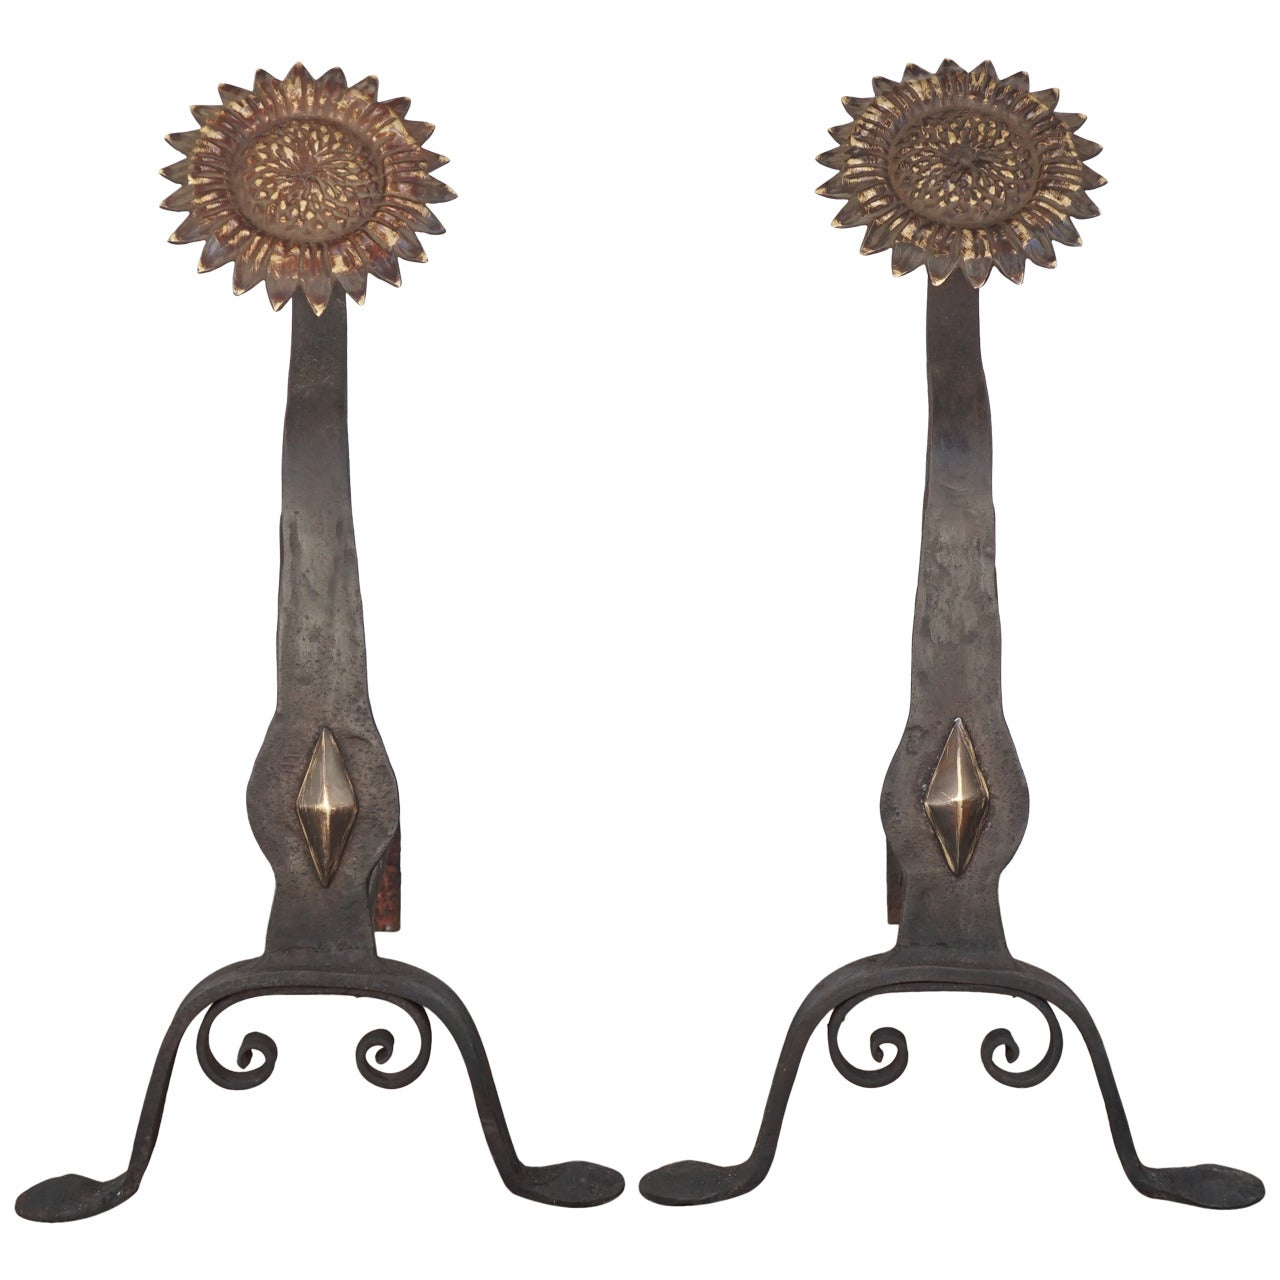 Period Arts & Crafts Bronze and Wrought Iron Sunflower Andirons